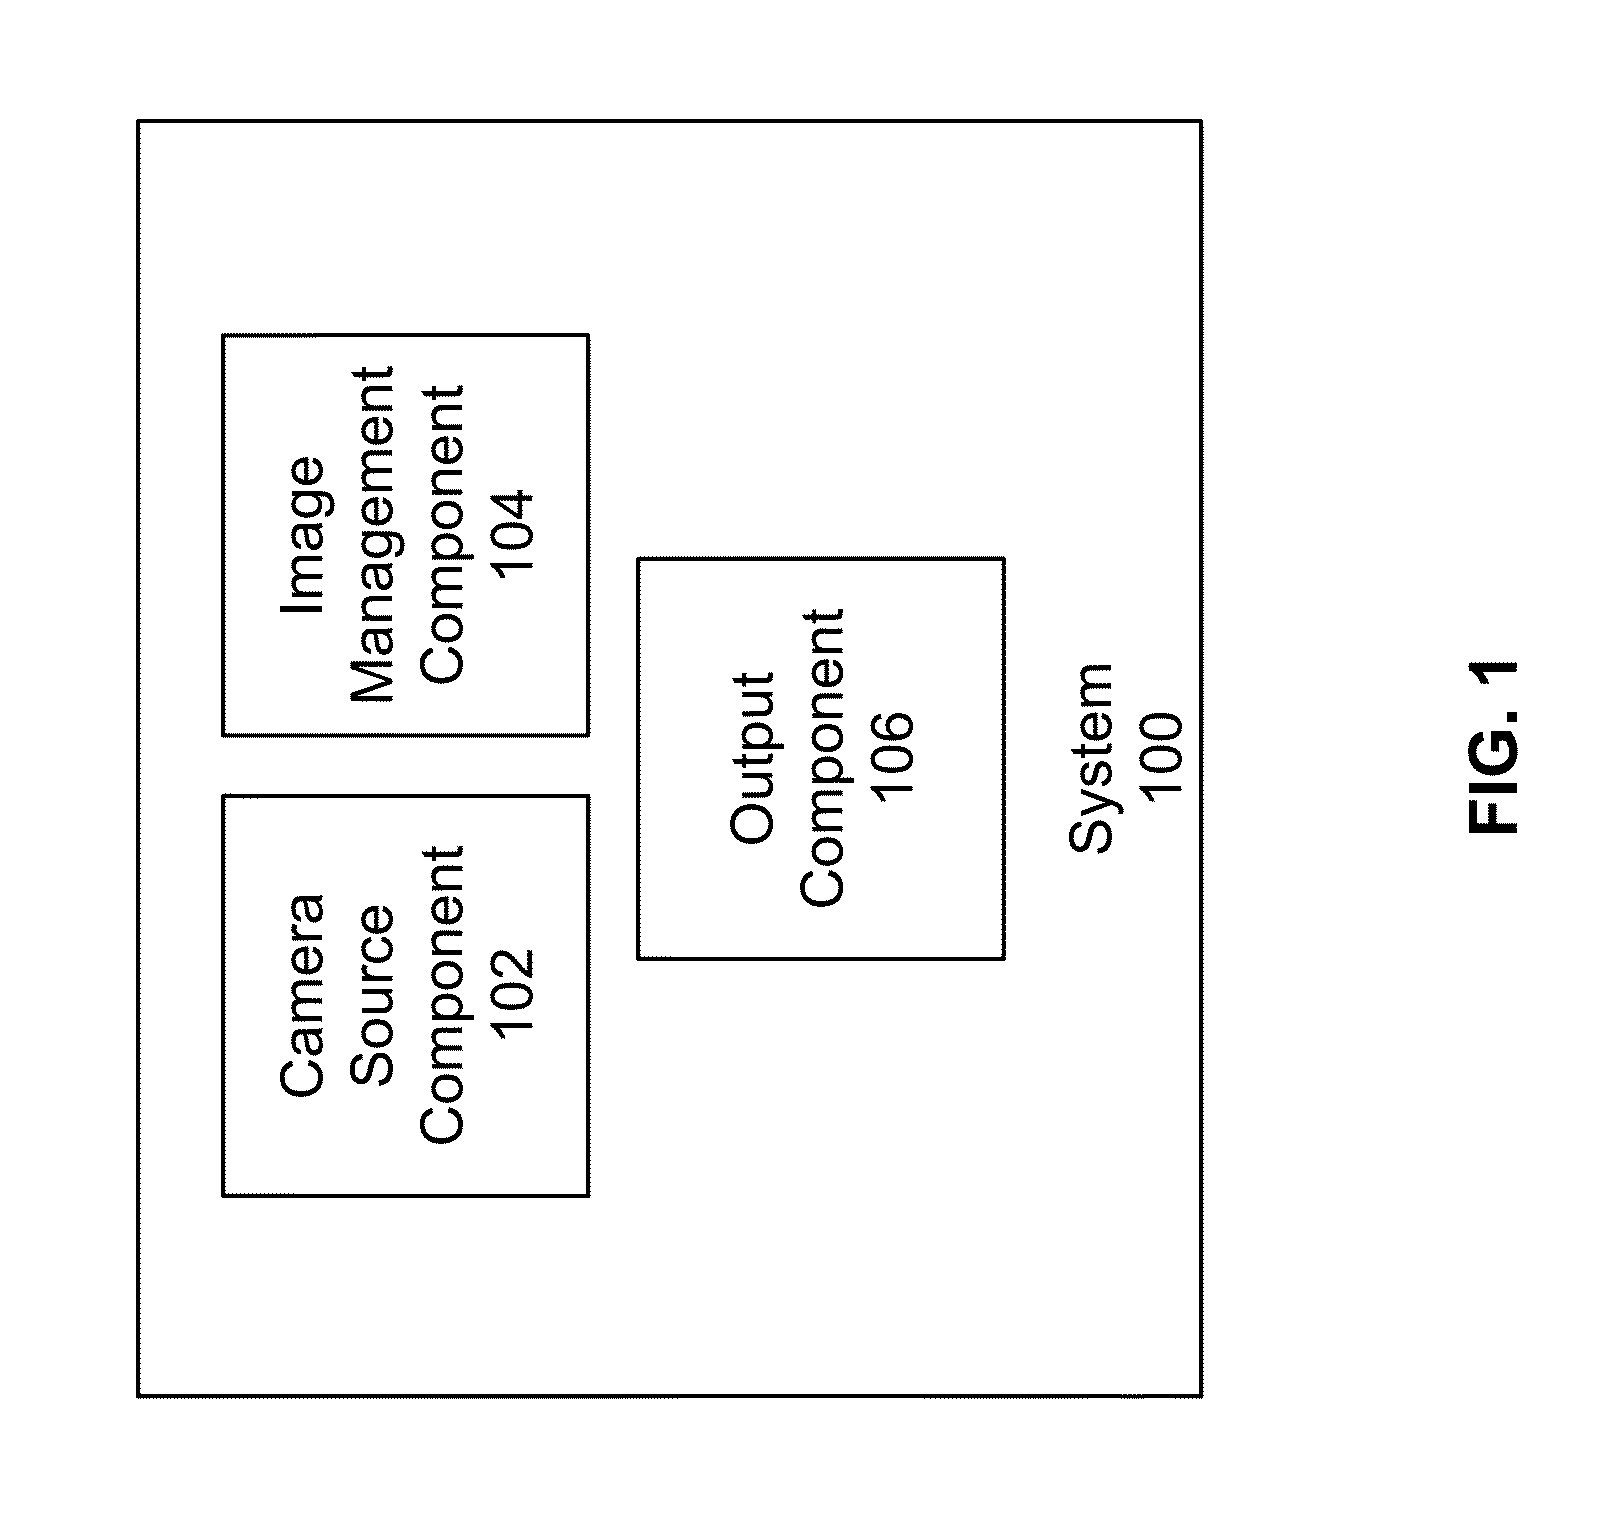 System and methods for video image processing